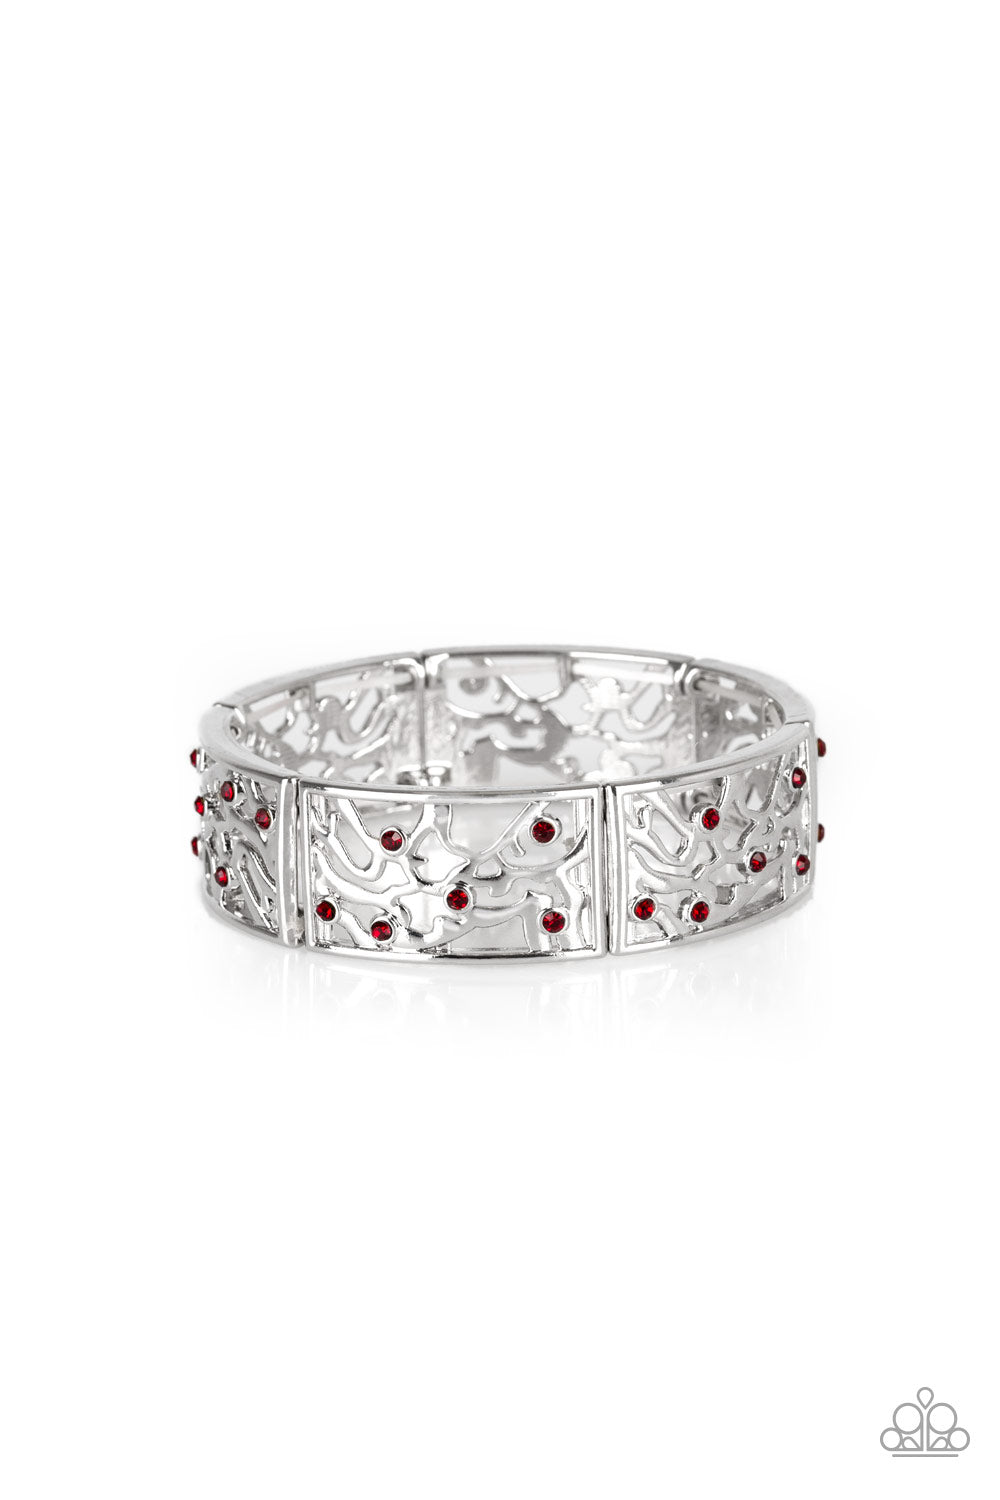 Paparazzi Bracelet - Yours and VINE - Red